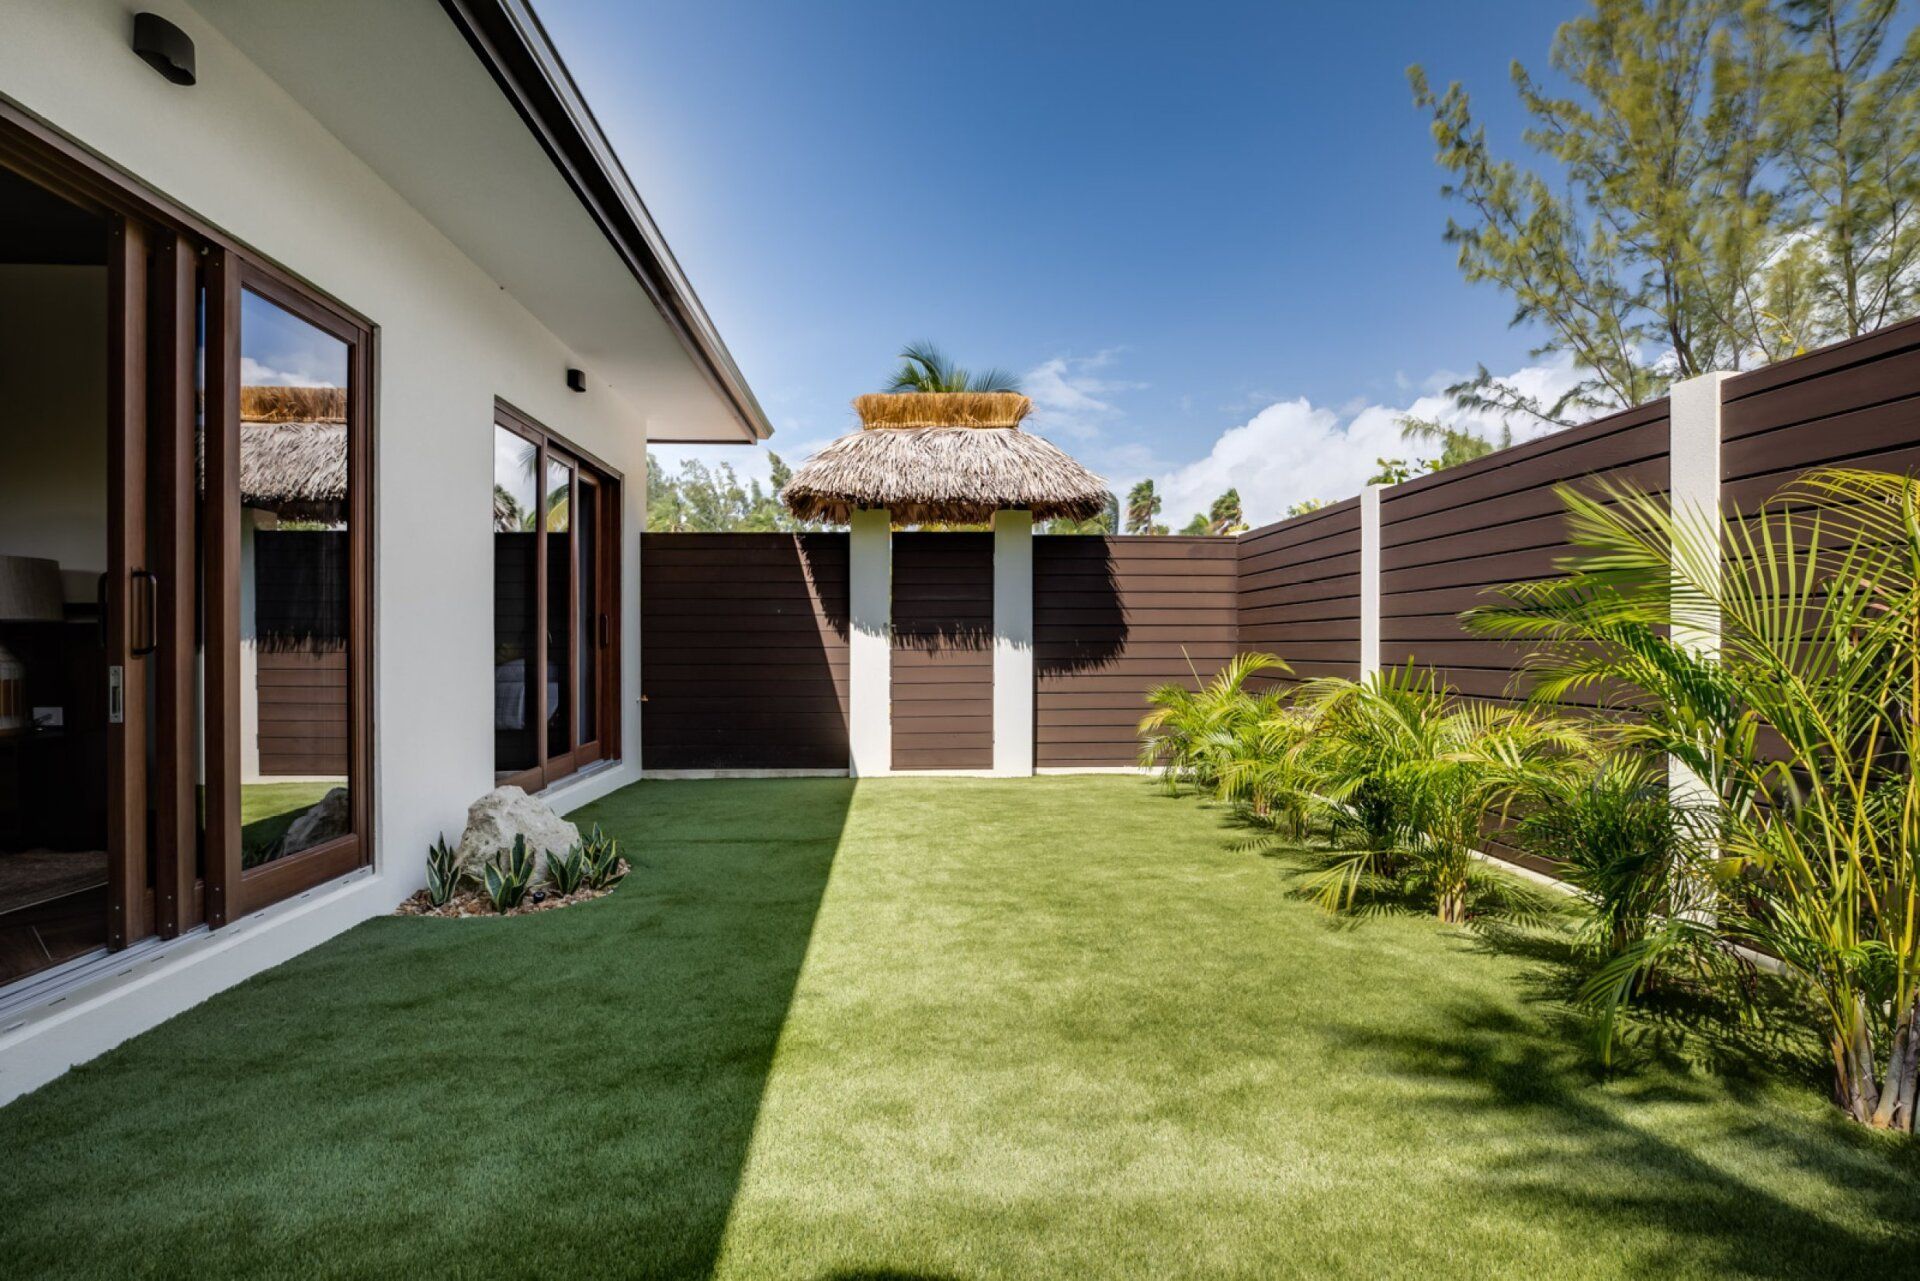 the backyard of a house with a lush green lawn and a wooden fence